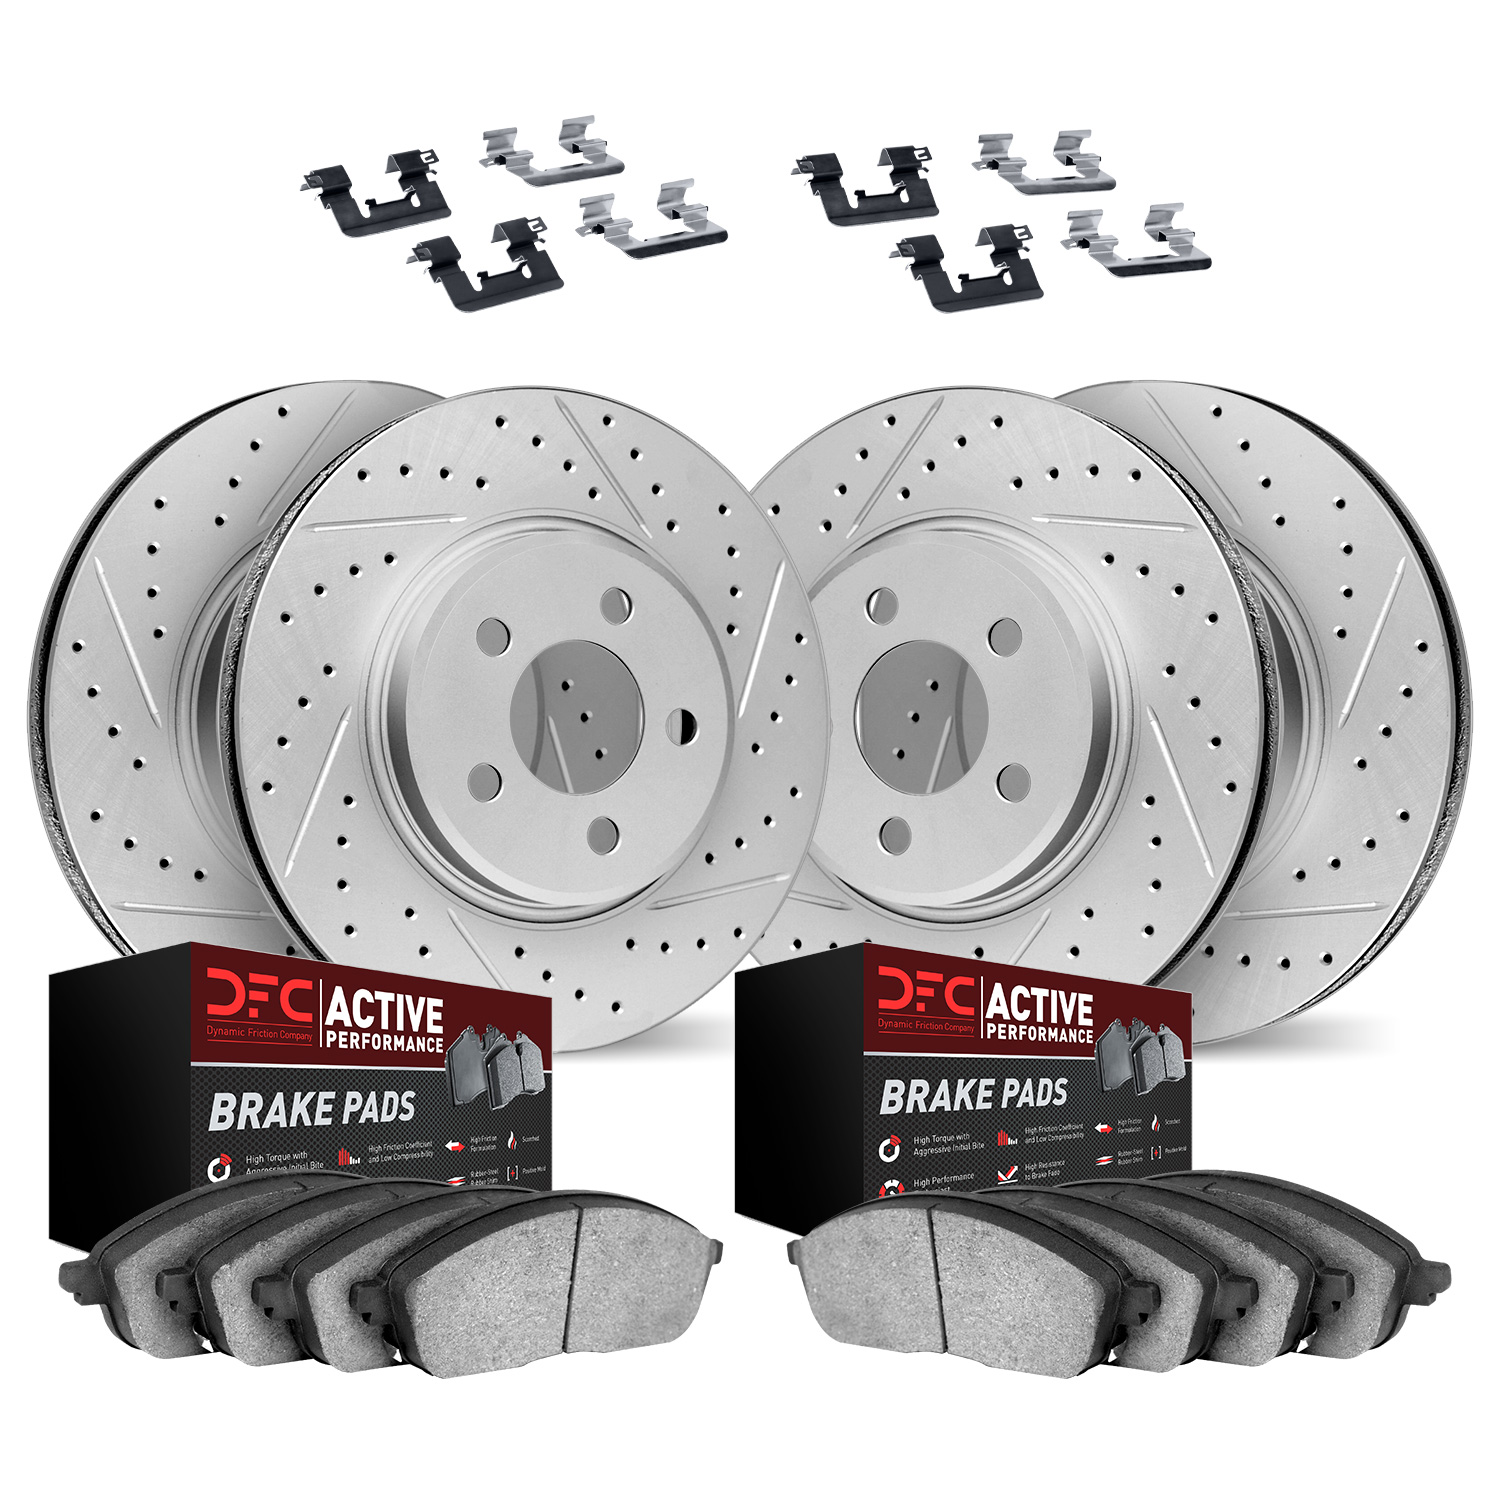 2714-73006 Geoperformance Drilled/Slotted Brake Rotors with Active Performance Pads Kit & Hardware, 2005-2011 Audi/Volkswagen, P